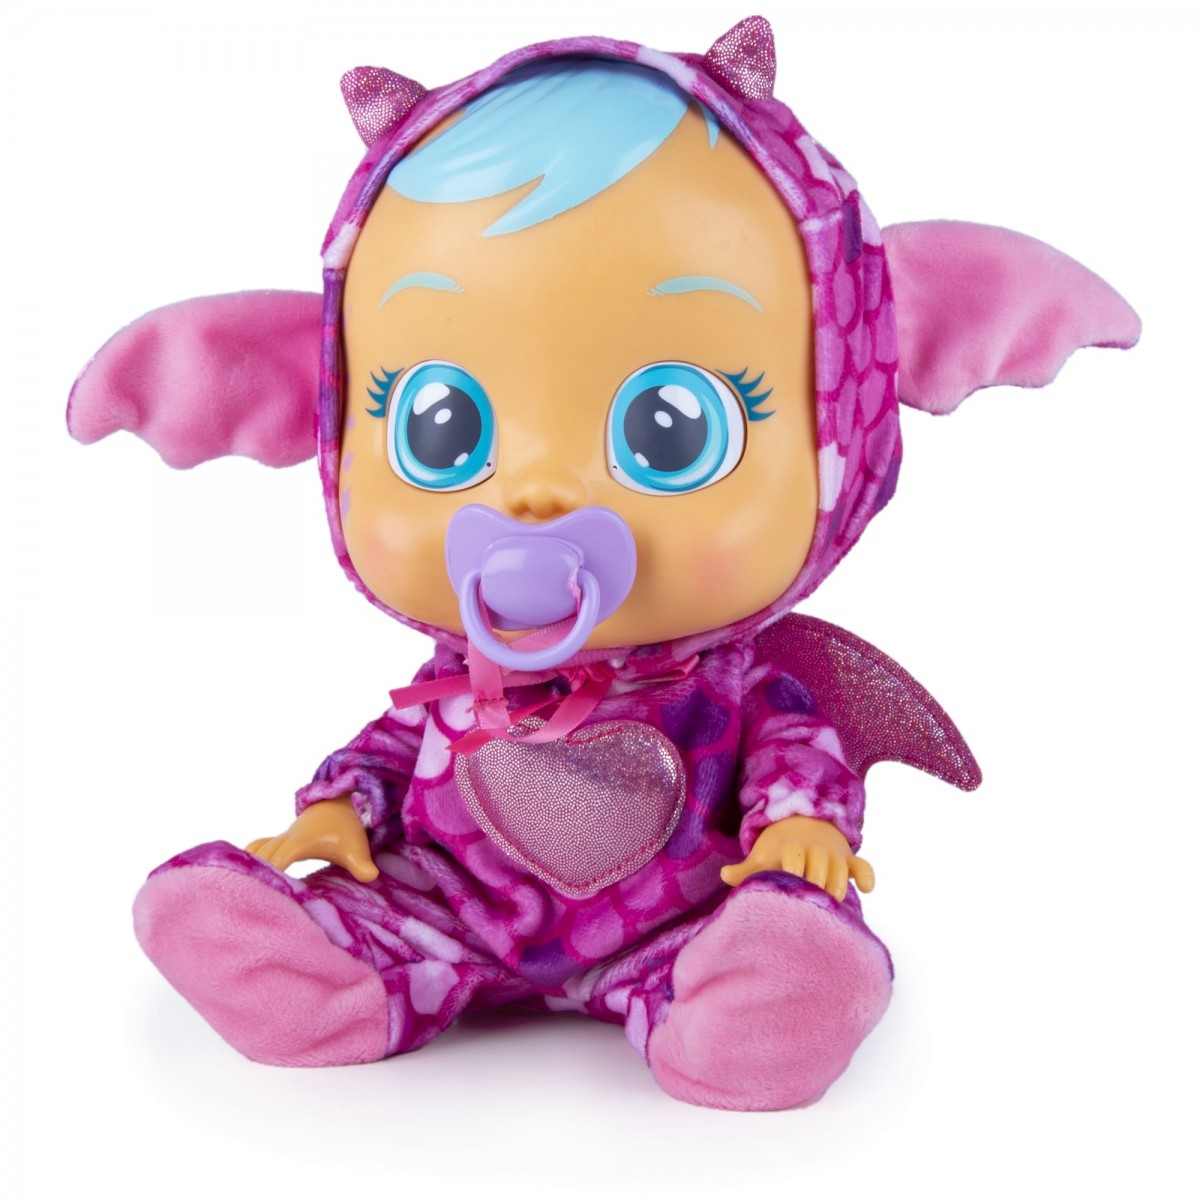 Cry Babies Bruny Dolls For Kids, 18M+